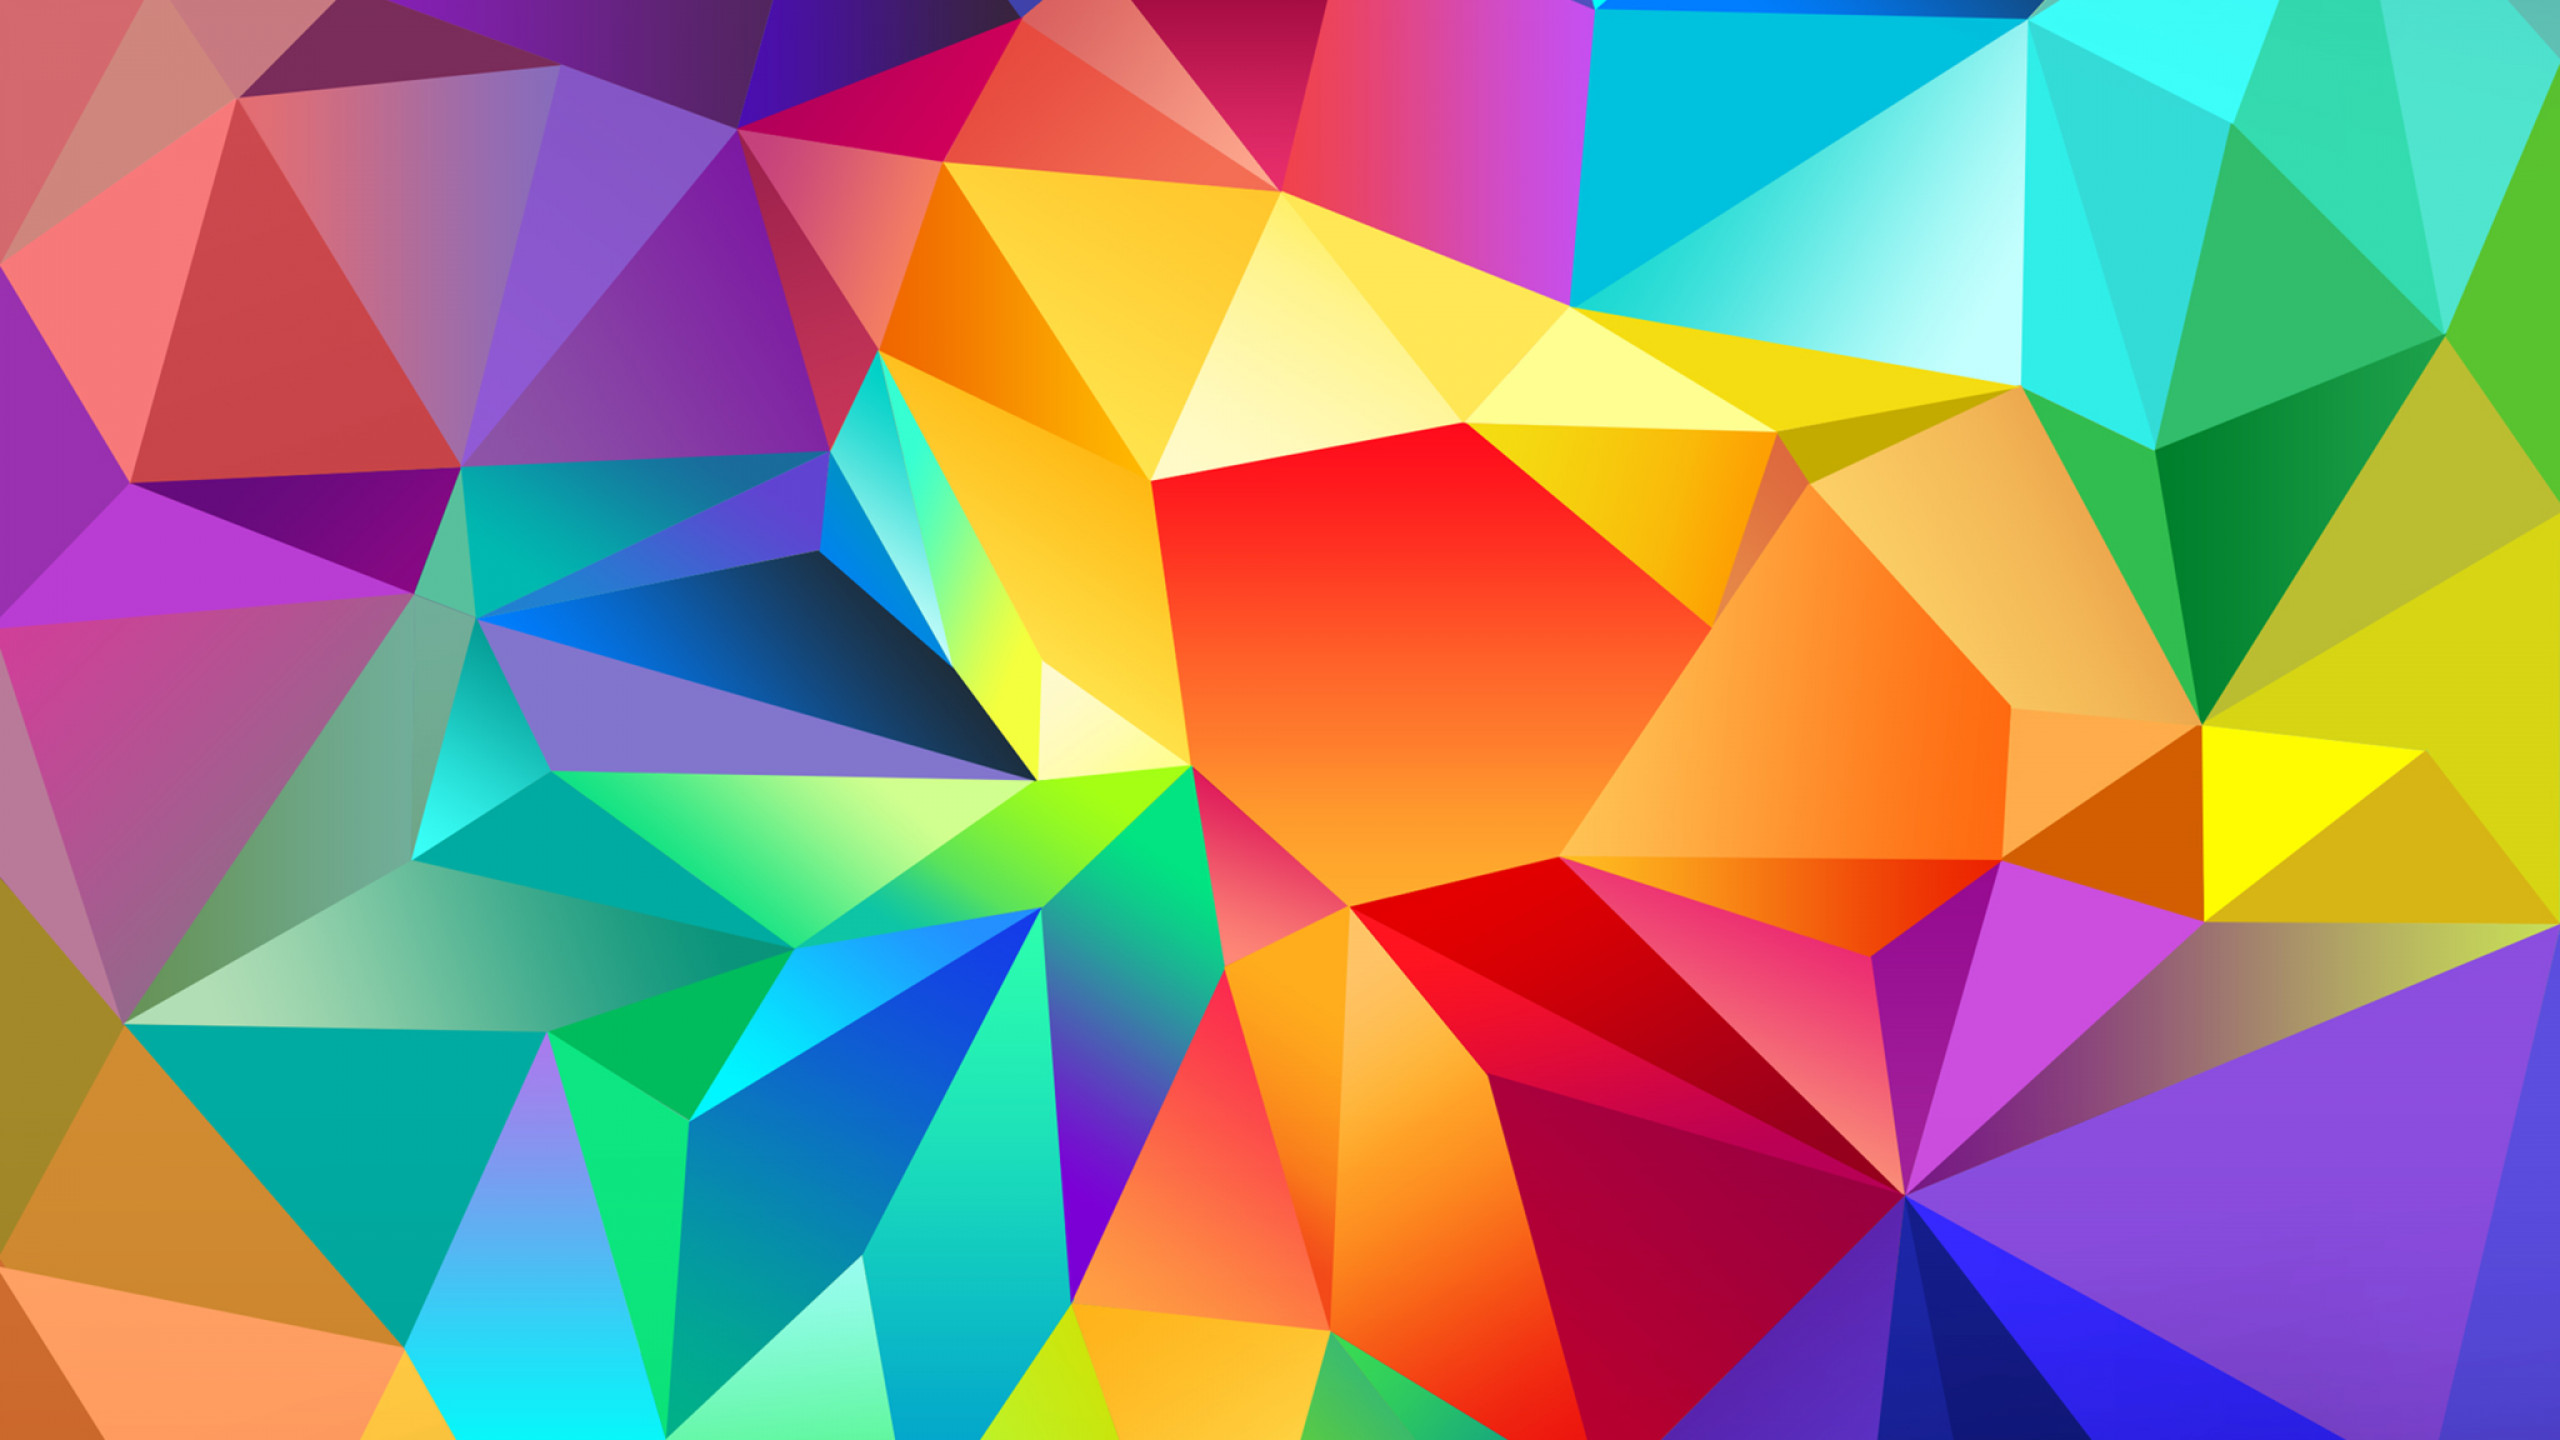 Wallpaper Polygon 4k Hd Wallpaper Android Wallpaper Triangle Background Orange Red Blue Pattern Os 3518 Page 11